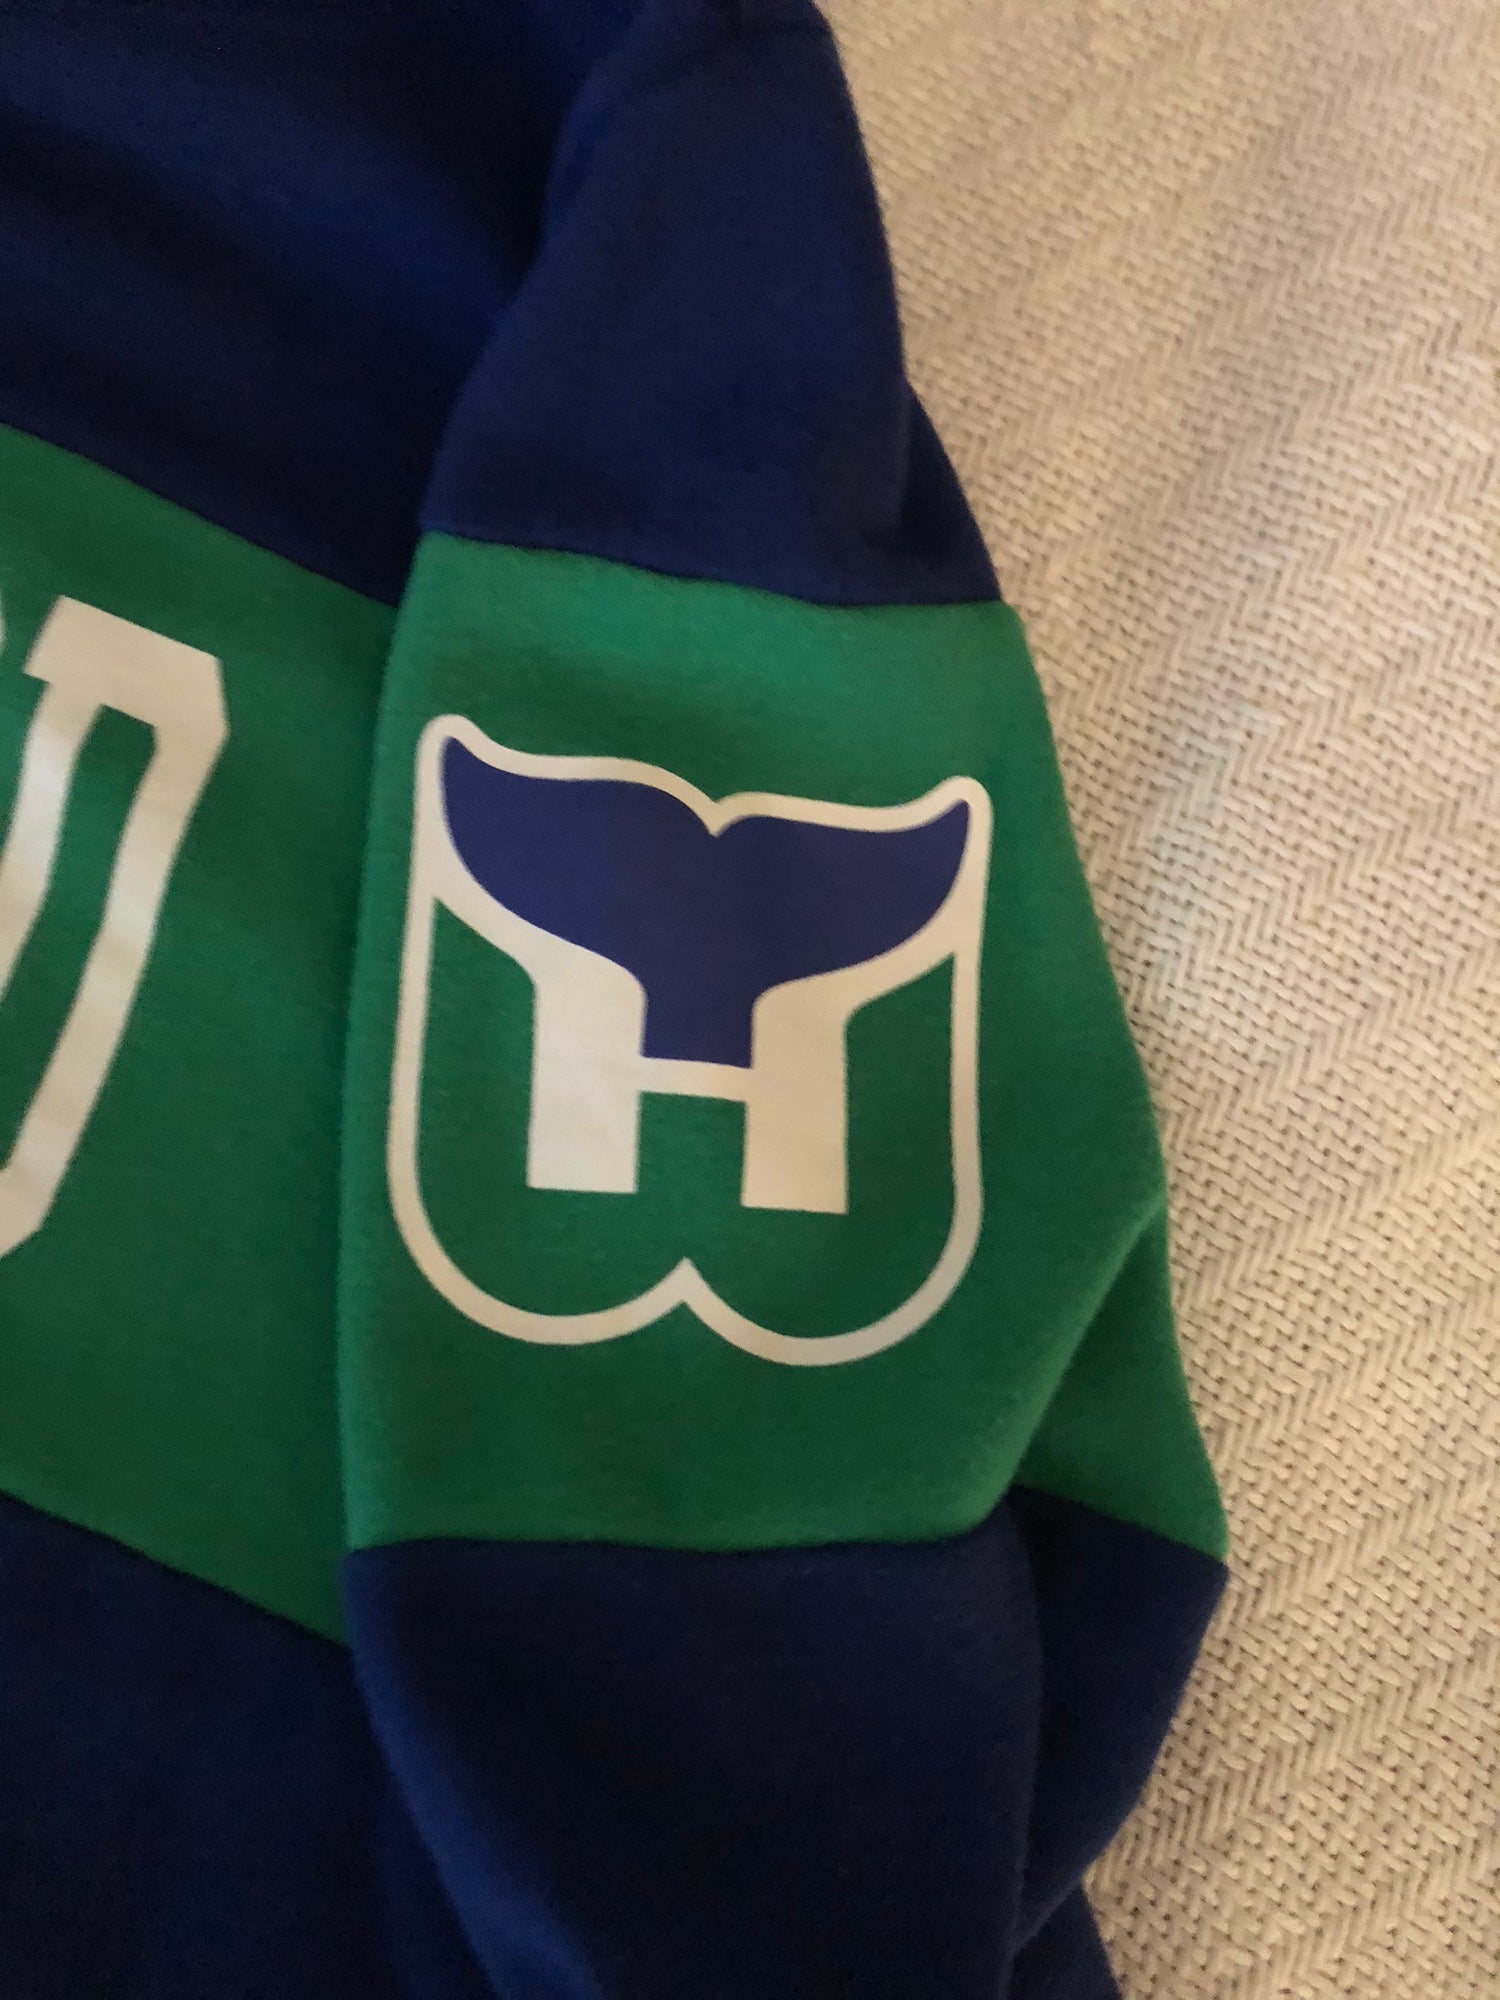 Hartford Whalers Men's 47 Brand Royal Pullover Jersey Hoodie